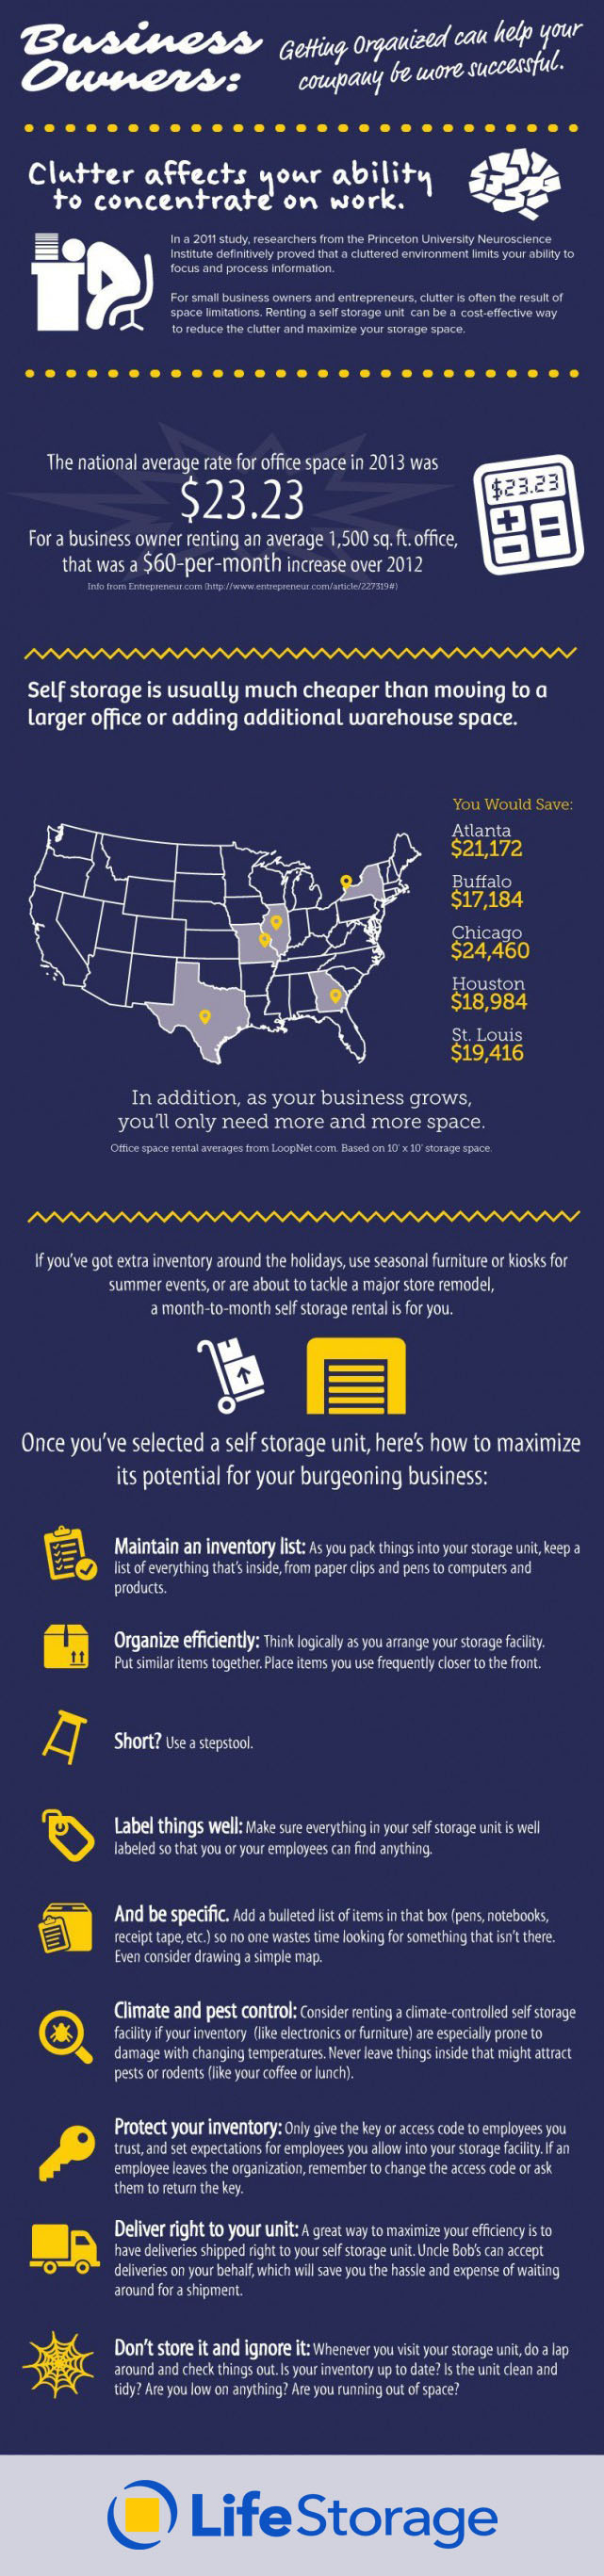 small business inventory management infographic